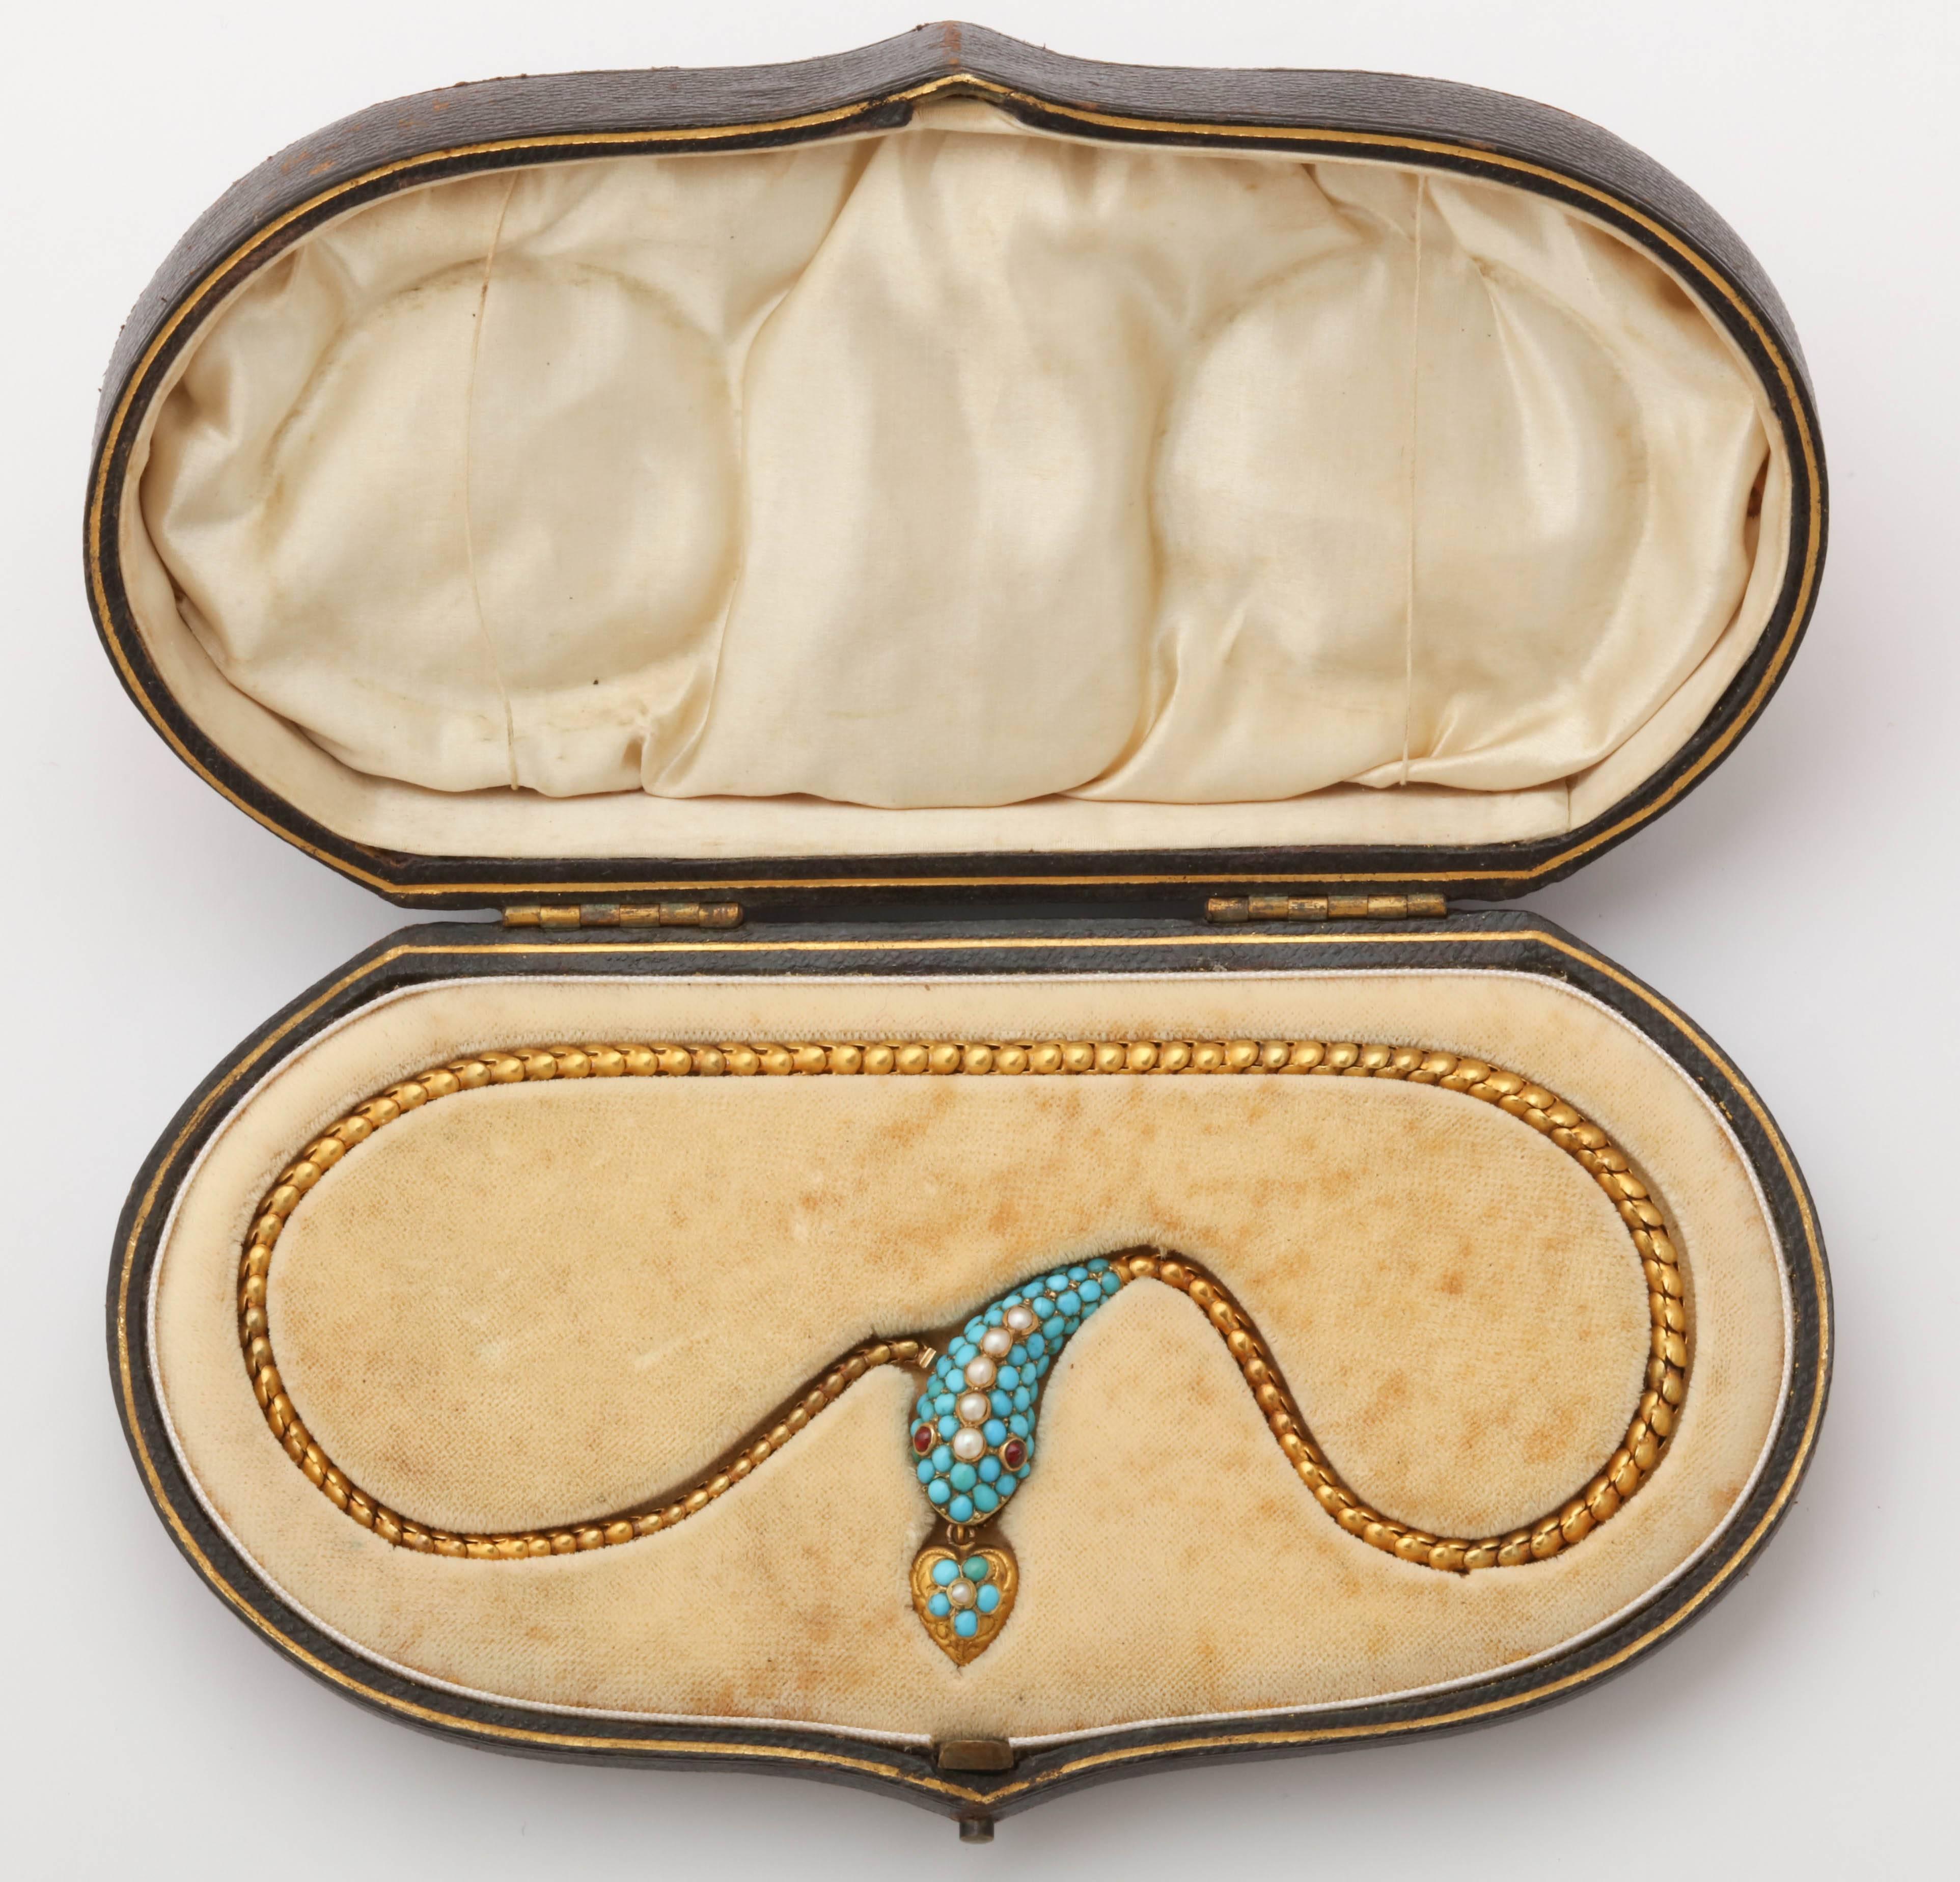 15K gold Victorian necklace adorned with snake's head in turquoise and pearls with garnet eyes. Dangling heart charm has locket compartment in the back. Necklace is accompanied by original fitted box.